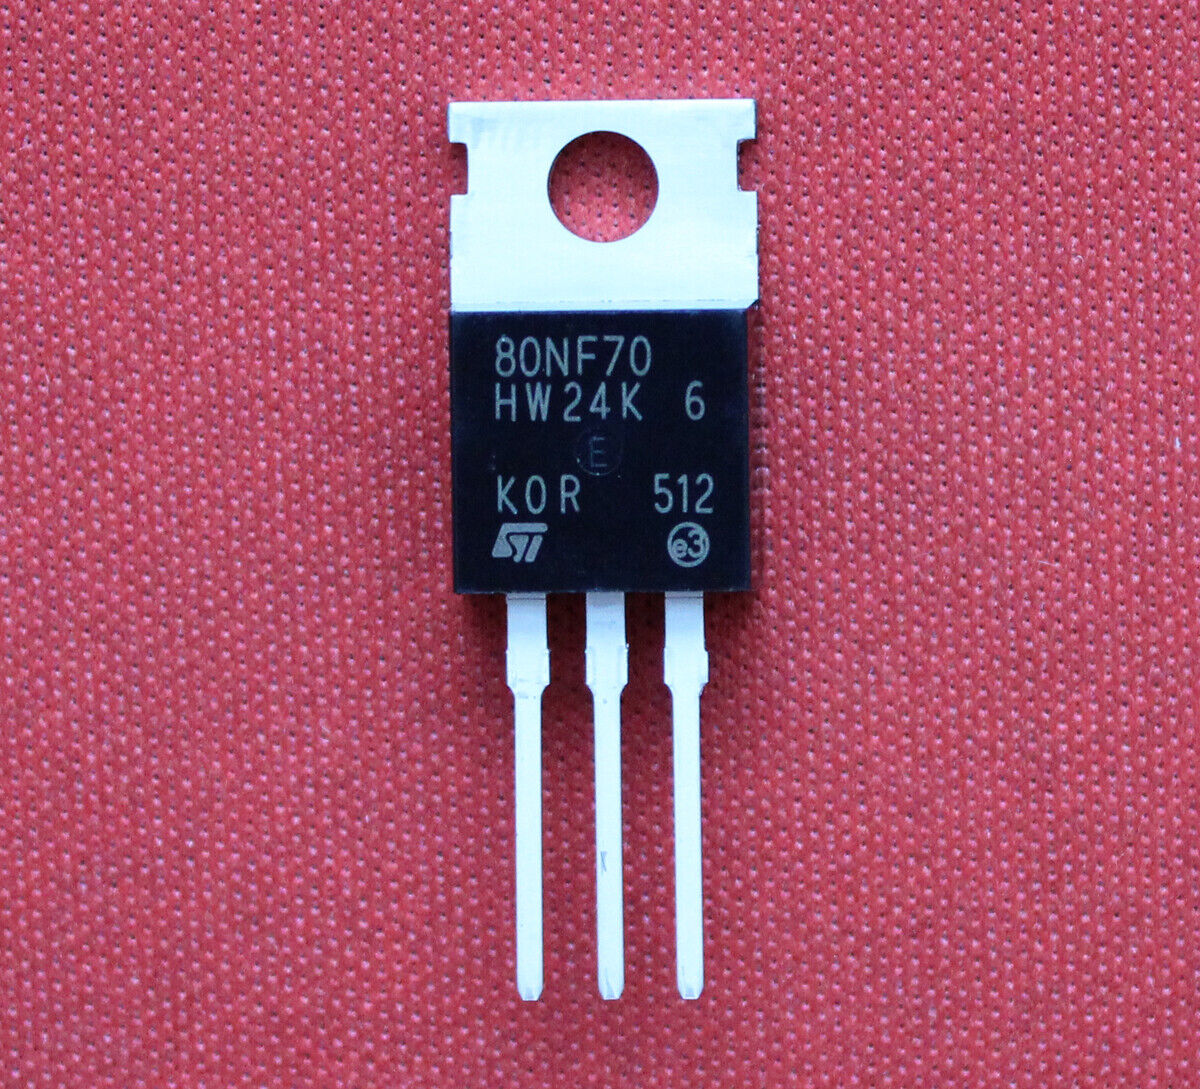 20pcs STP80NF70 P80NF70 80NF70 Integrated Circuit IC